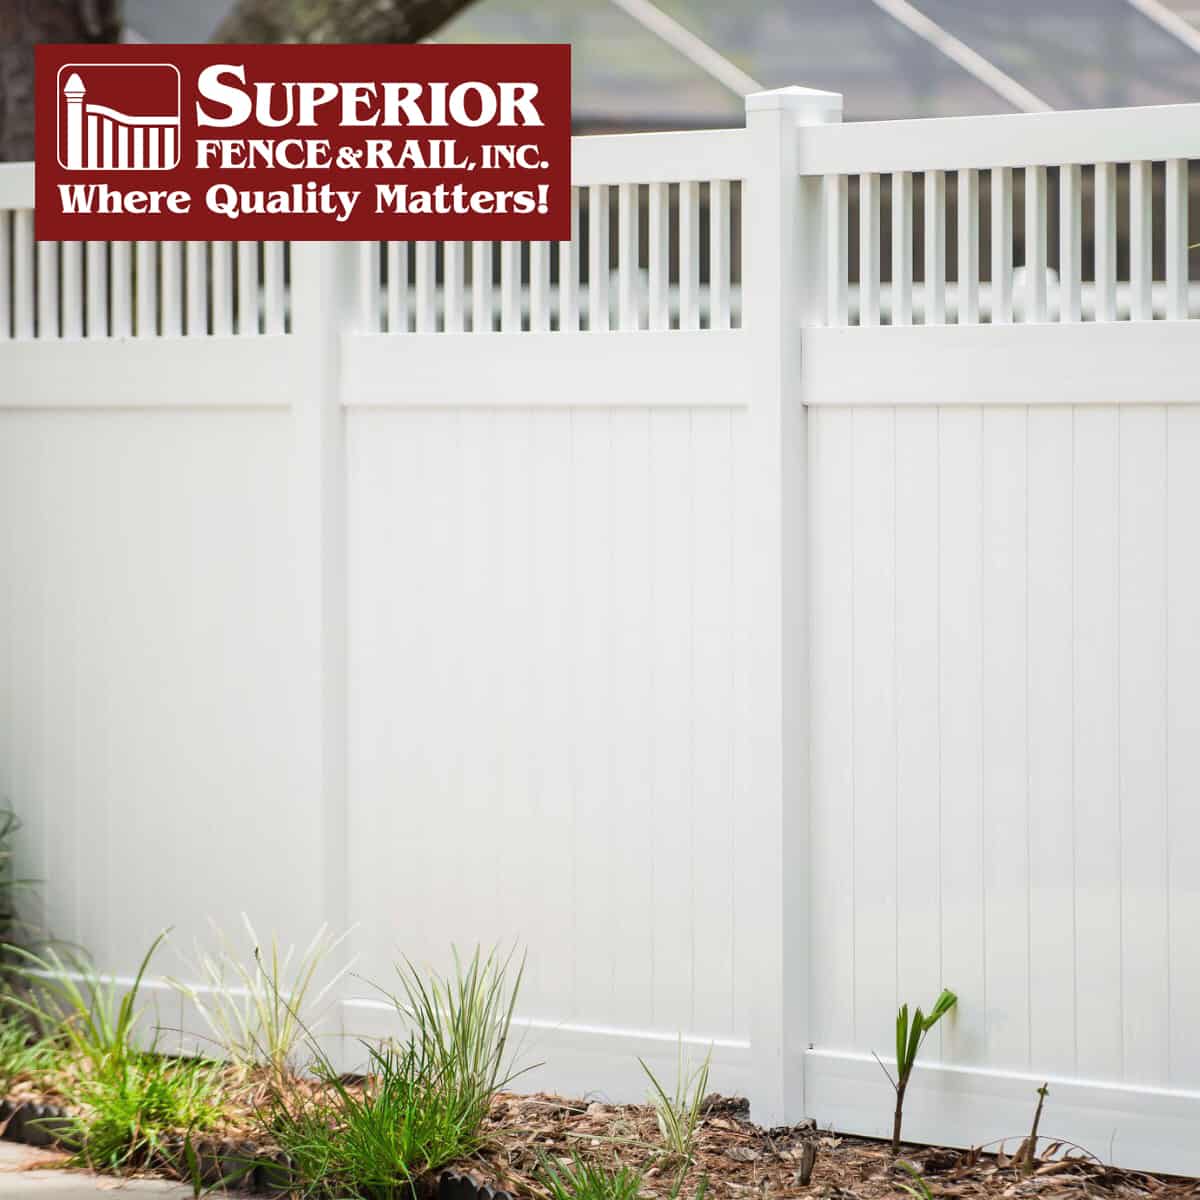 https://www.superiorfenceandrail.com/wp-content/uploads/2022/05/Spanish-Fork-Fence-Company-Contractor.jpg